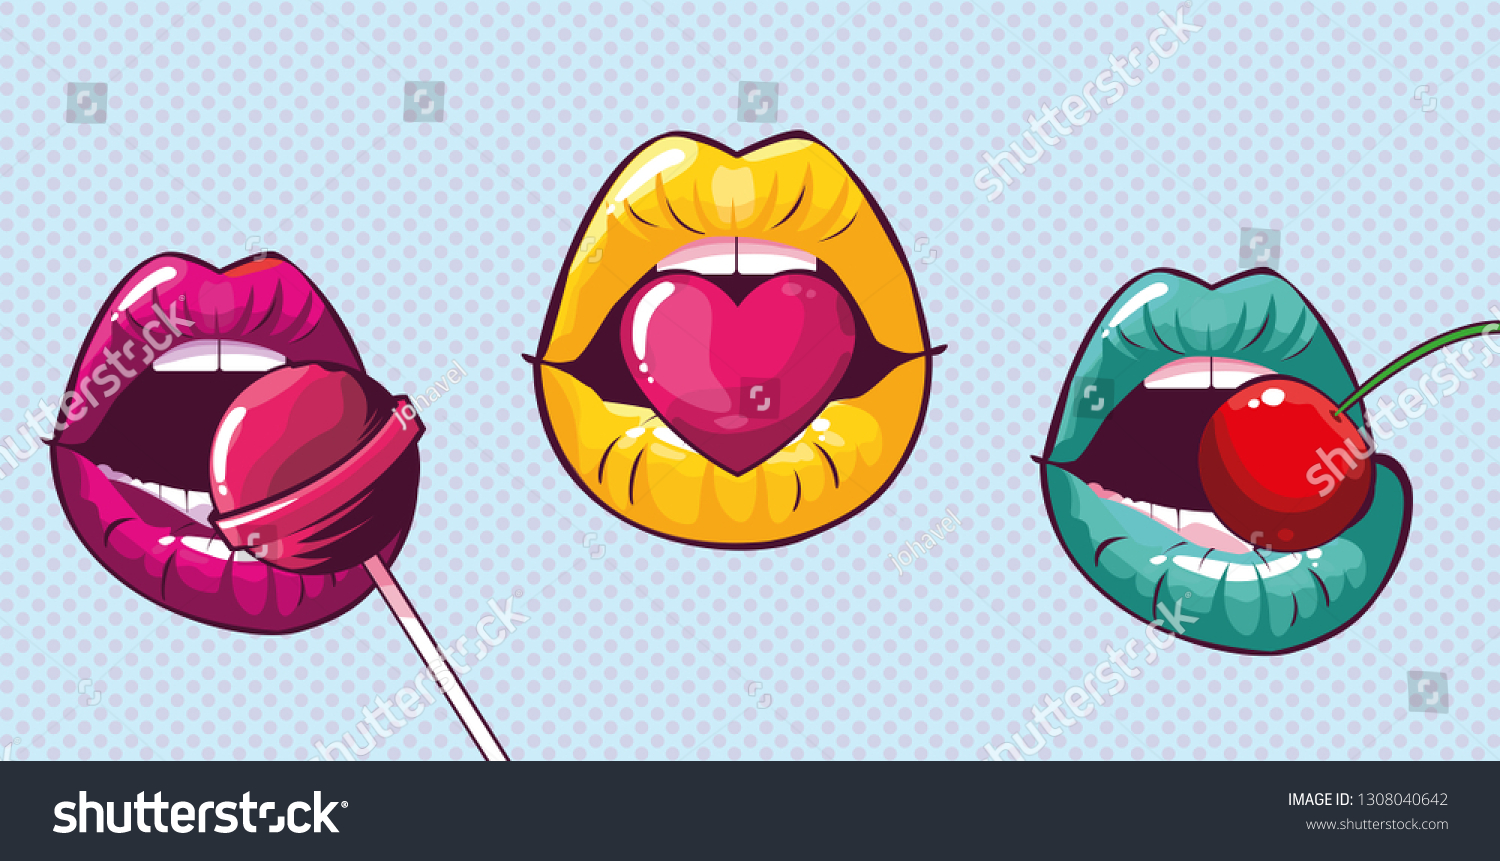 Set Sexy Woman Mouths Pop Art Stock Vector Royalty Free 1308040642